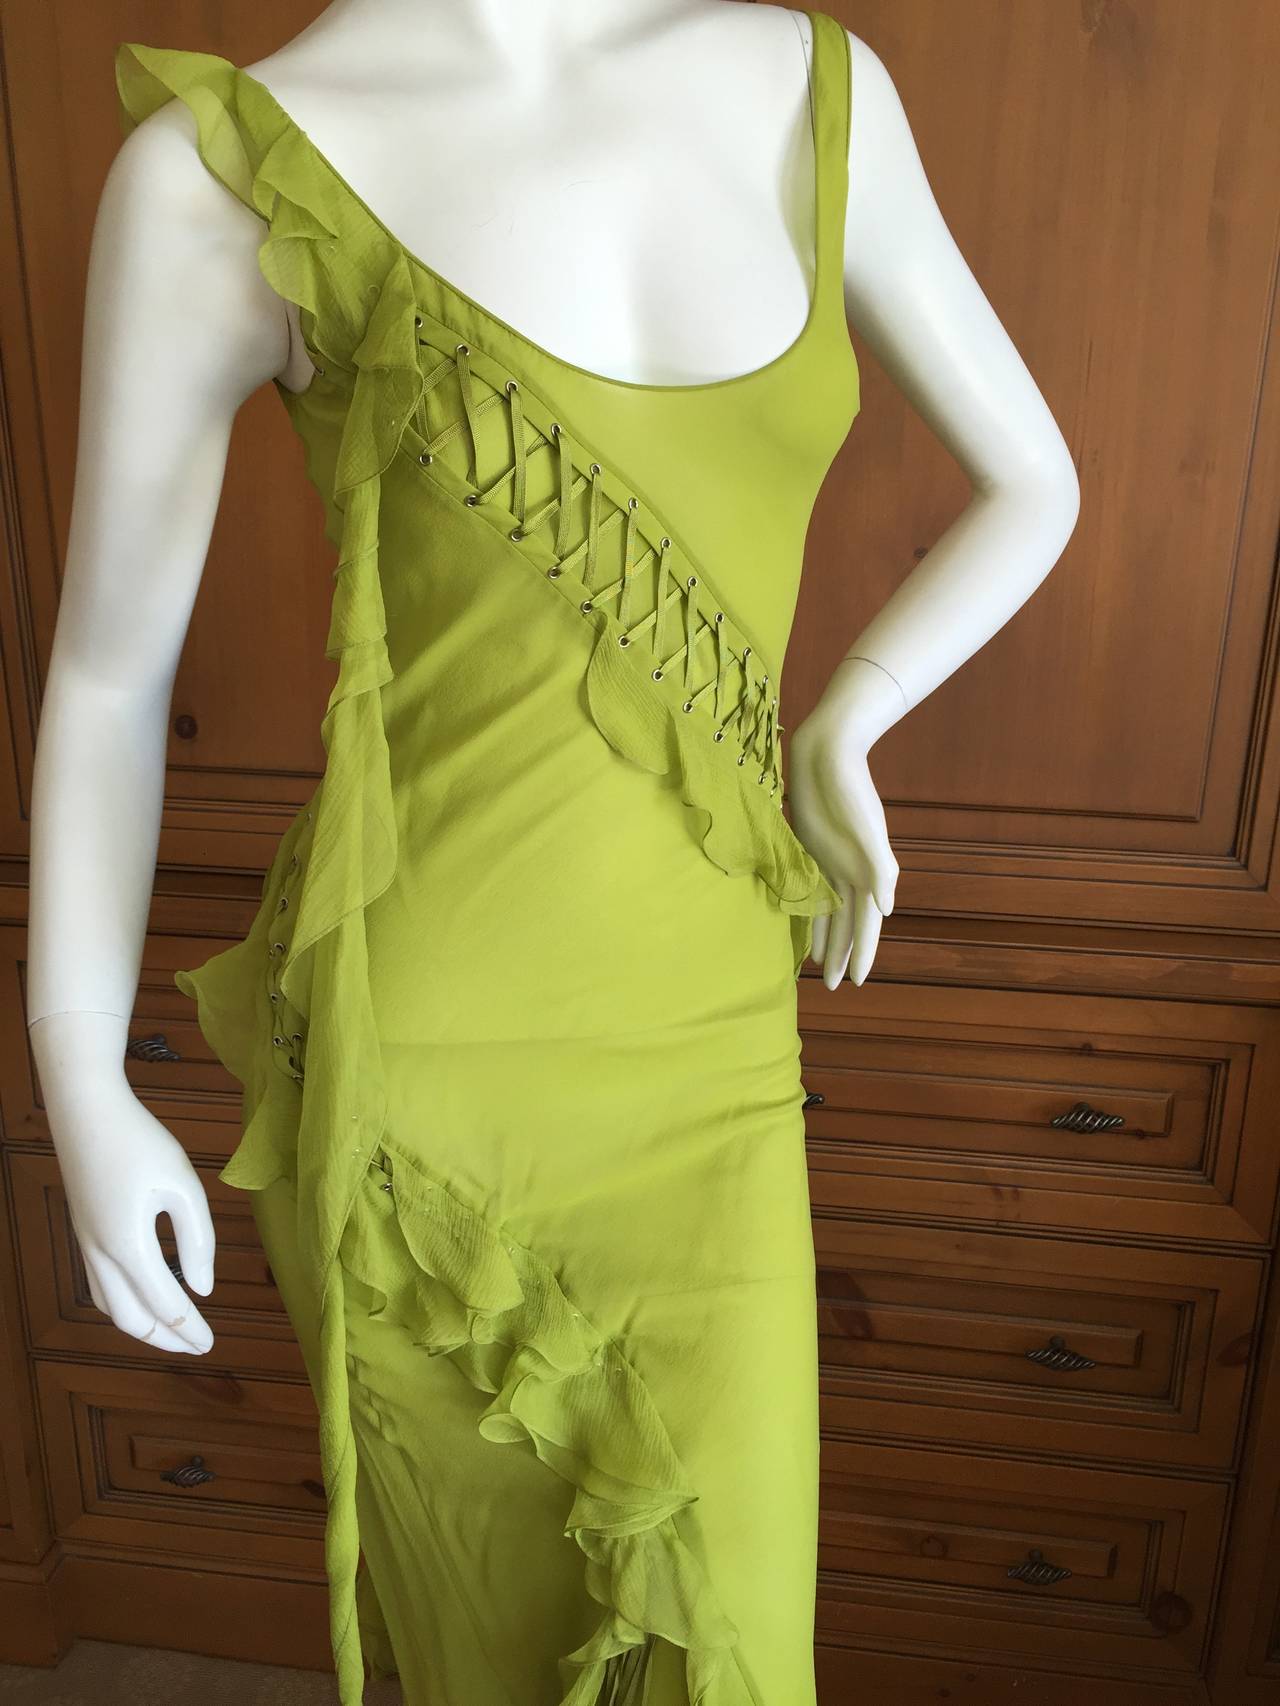 Christian Dior by John Galliano Dress w Spiral Corset Lace Details 1